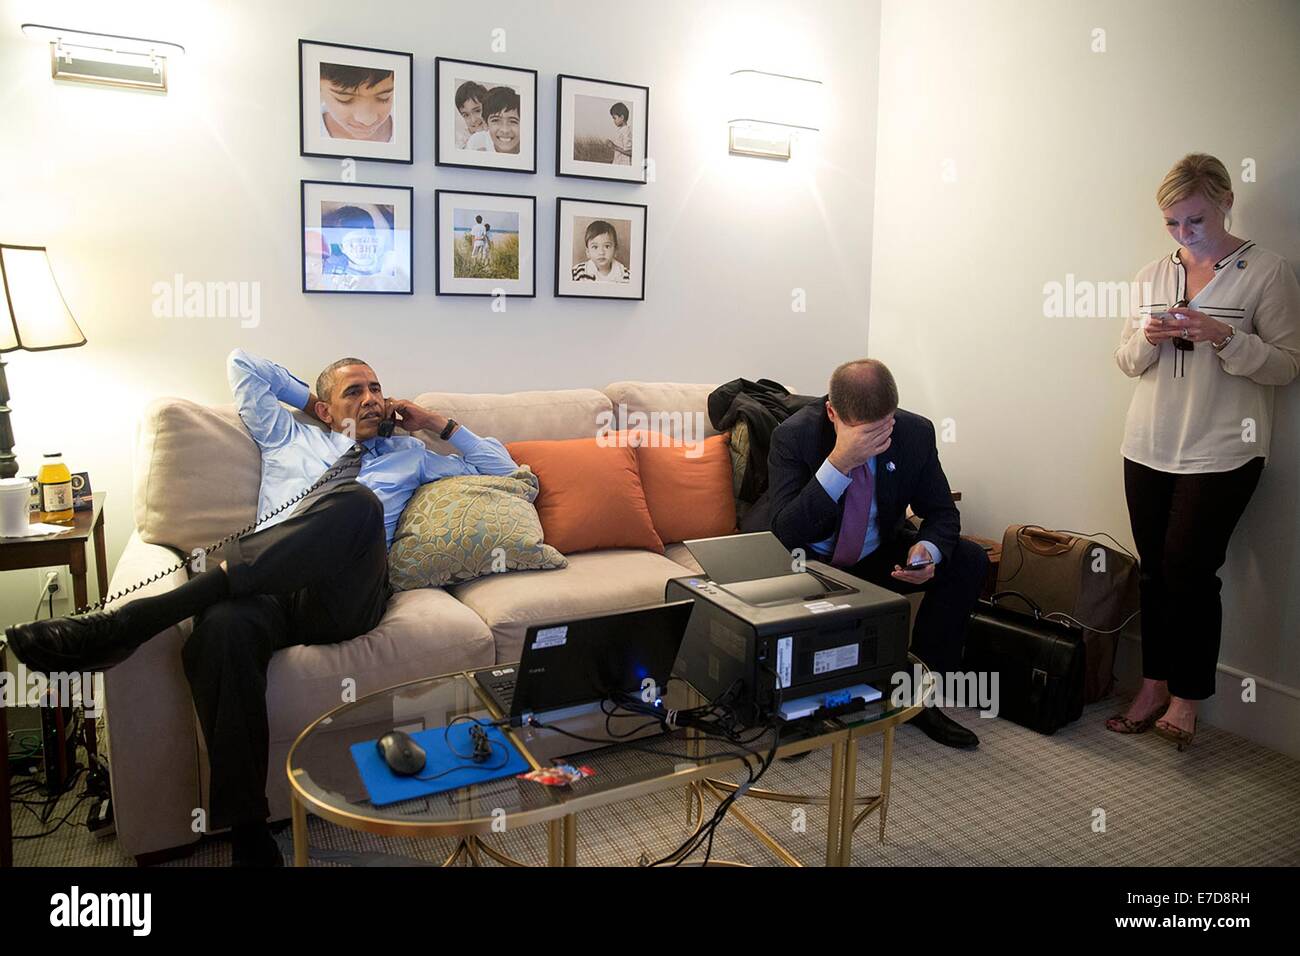 US President Barack Obama holds a conference call regarding the crash of Malaysia Airlines Flight 17 in Ukraine, at a private home July 17, 2014 in New York, N.Y. Senior Advisor Dan Pfeiffer and Anita Breckenridge, Deputy Chief of Staff for Operations attend. Stock Photo